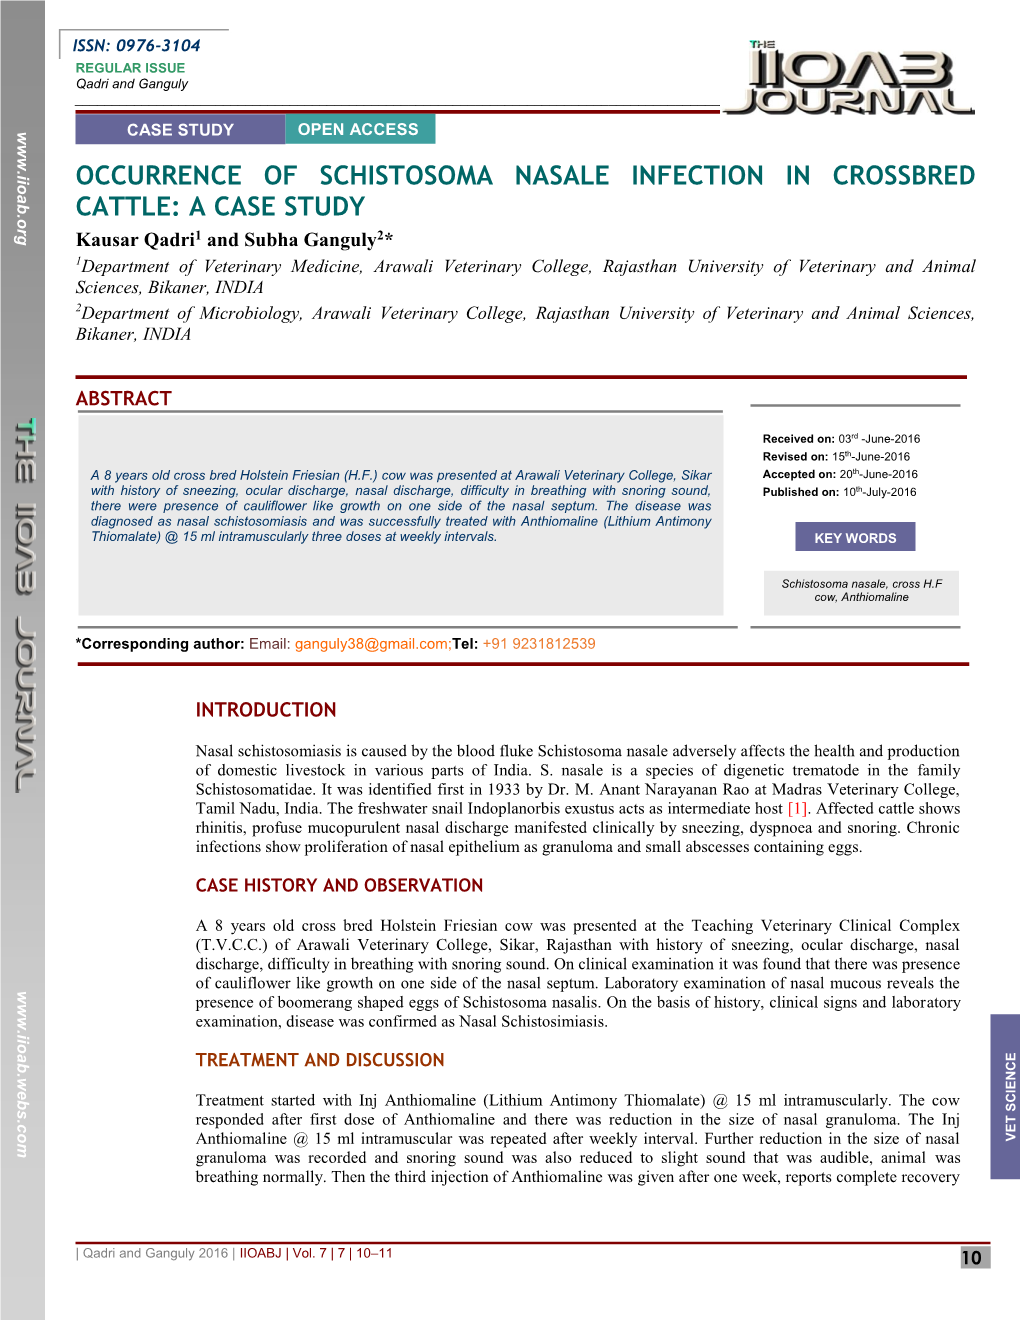 Occurrence of Schistosoma Nasale Infection in Crossbred Cattle: a Case Study 1 2